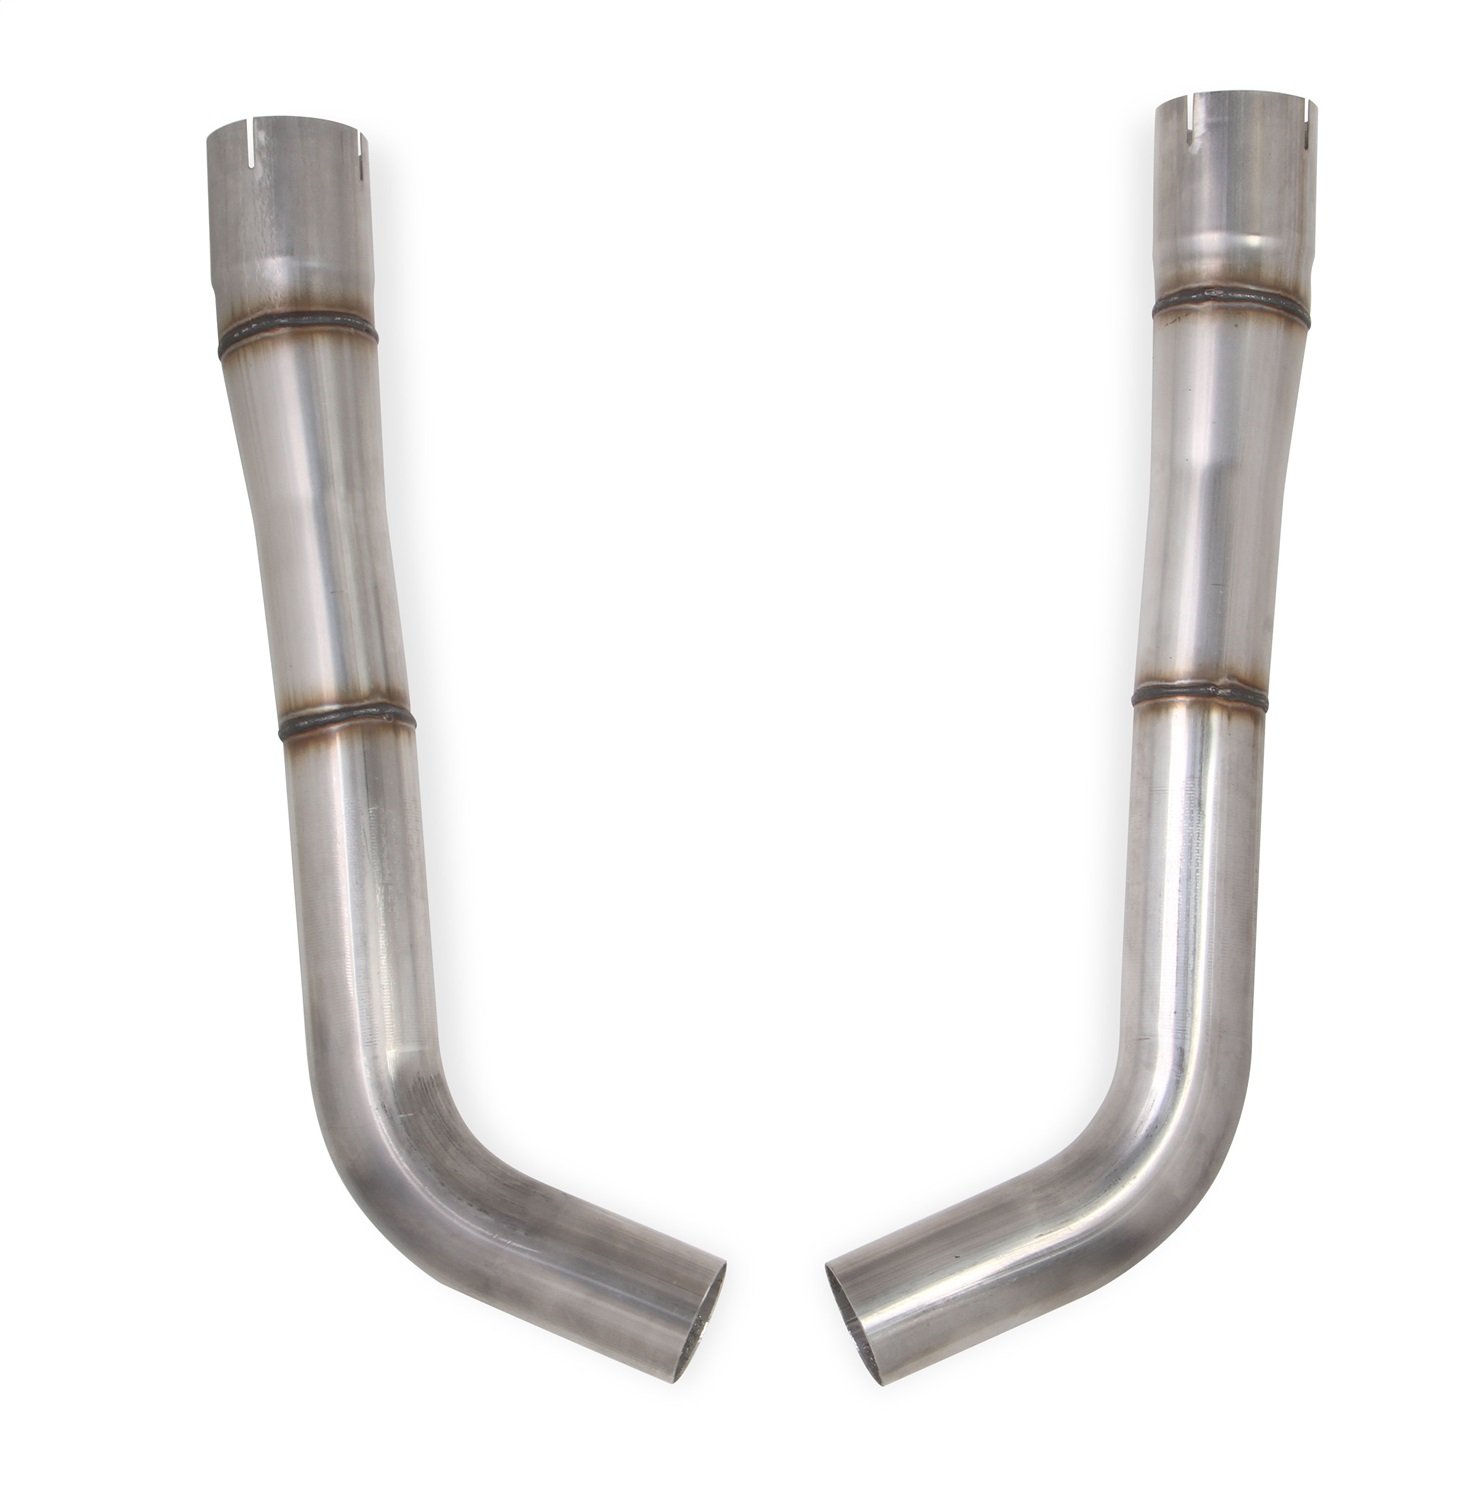 ADAPTER PIPE KIT A-BODY